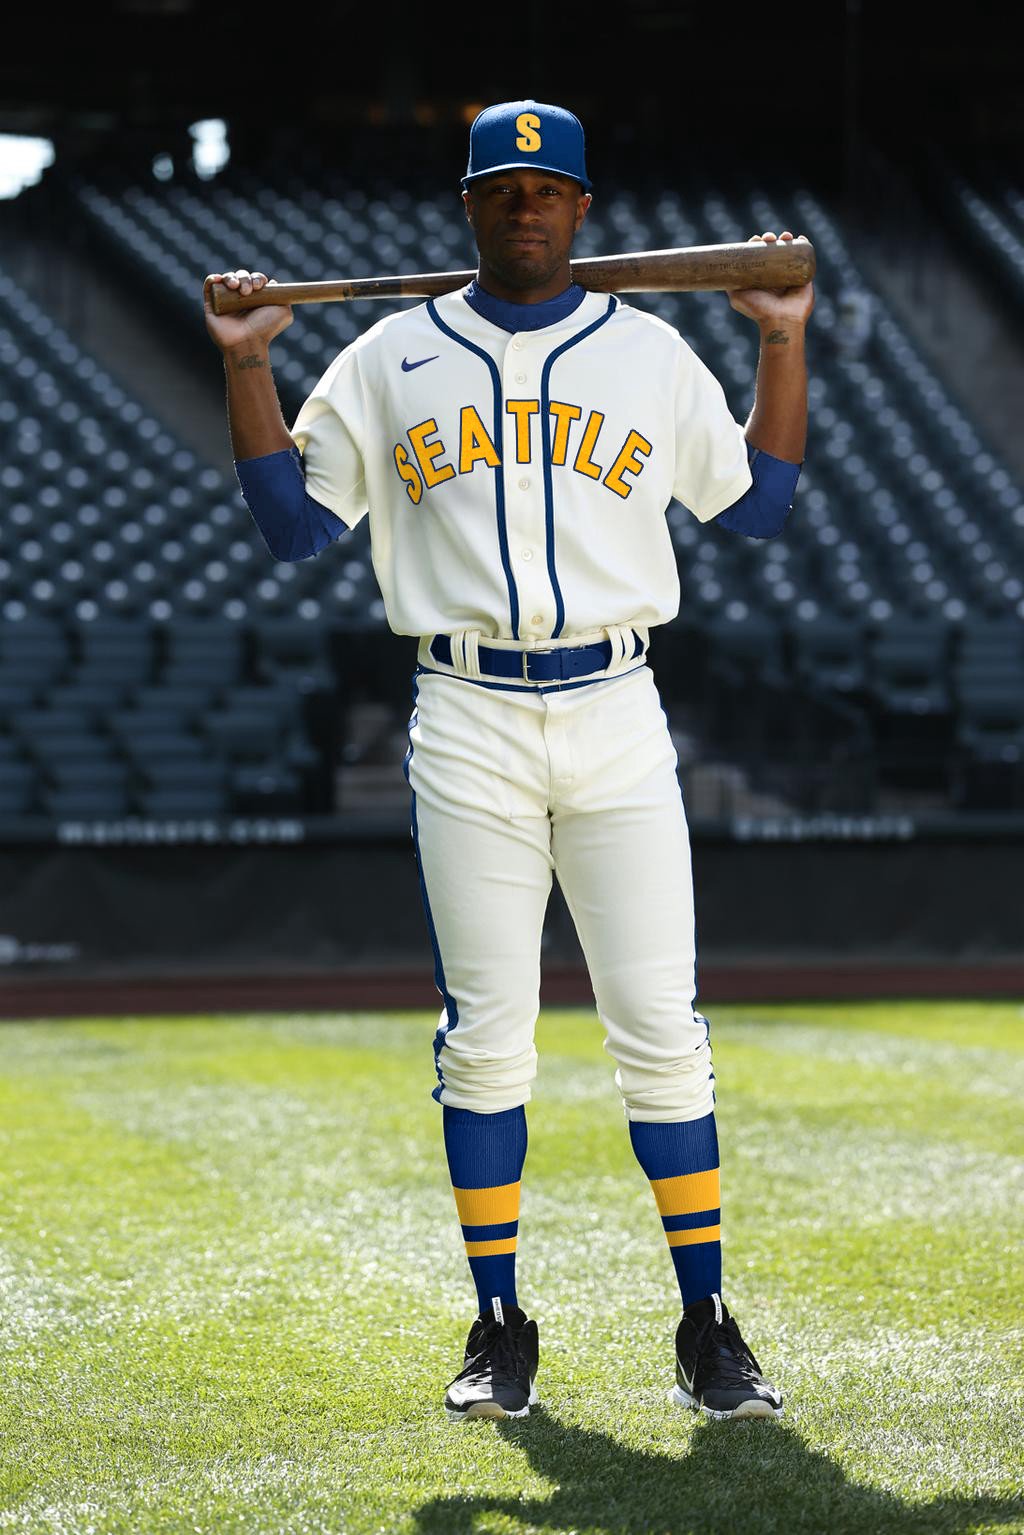 zachleft on X: Steelheads uniforms in Mariners blue and yellow   / X